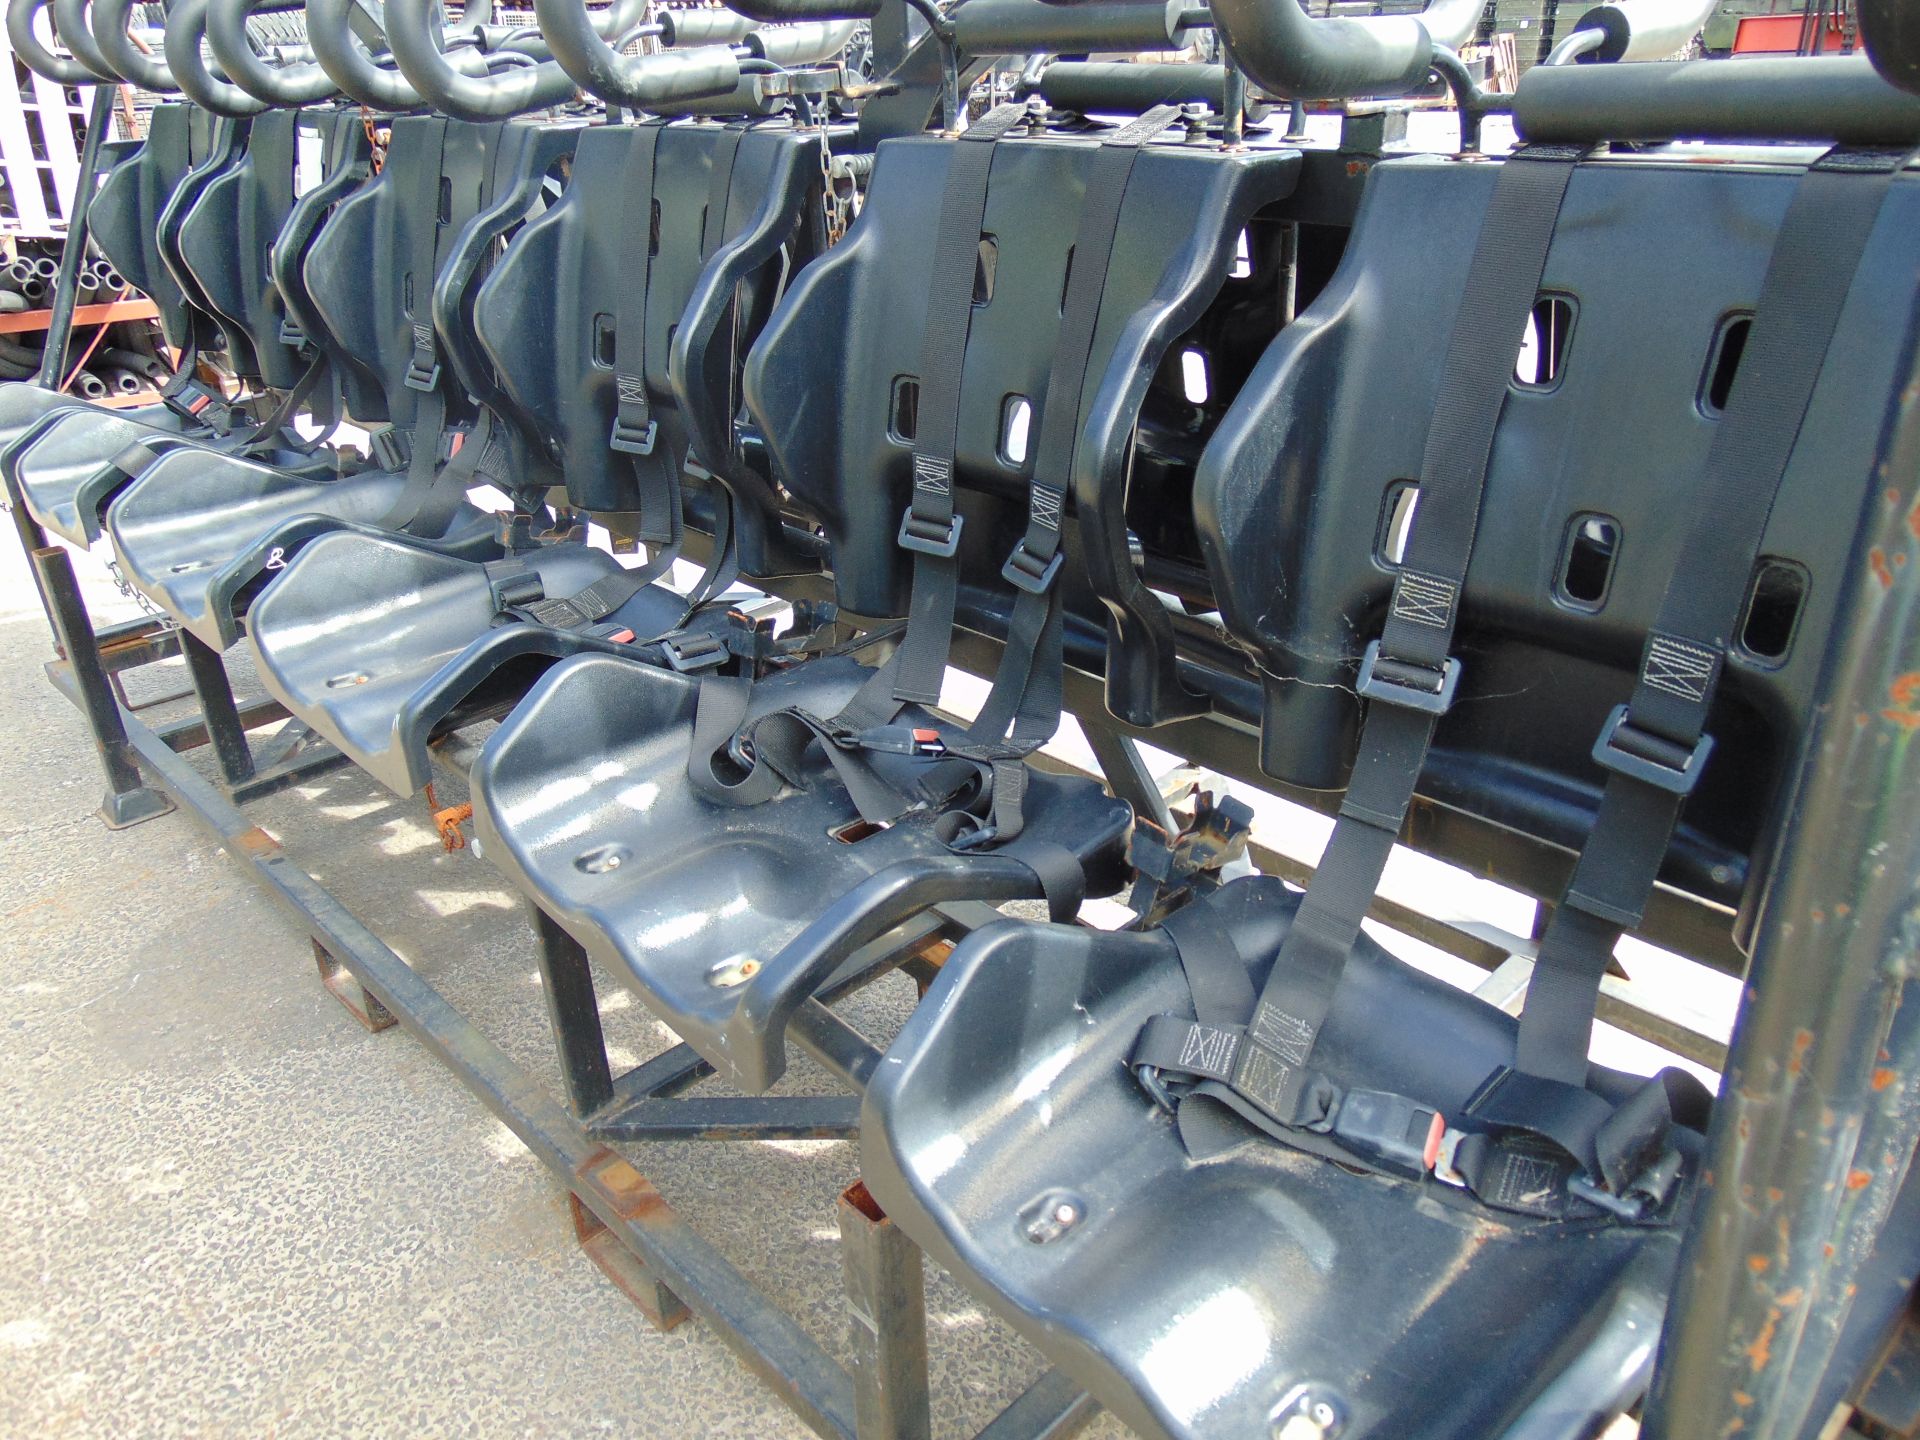 14 Man Security Seat suitable for Leyland Dafs, Bedfords etc - Image 7 of 9